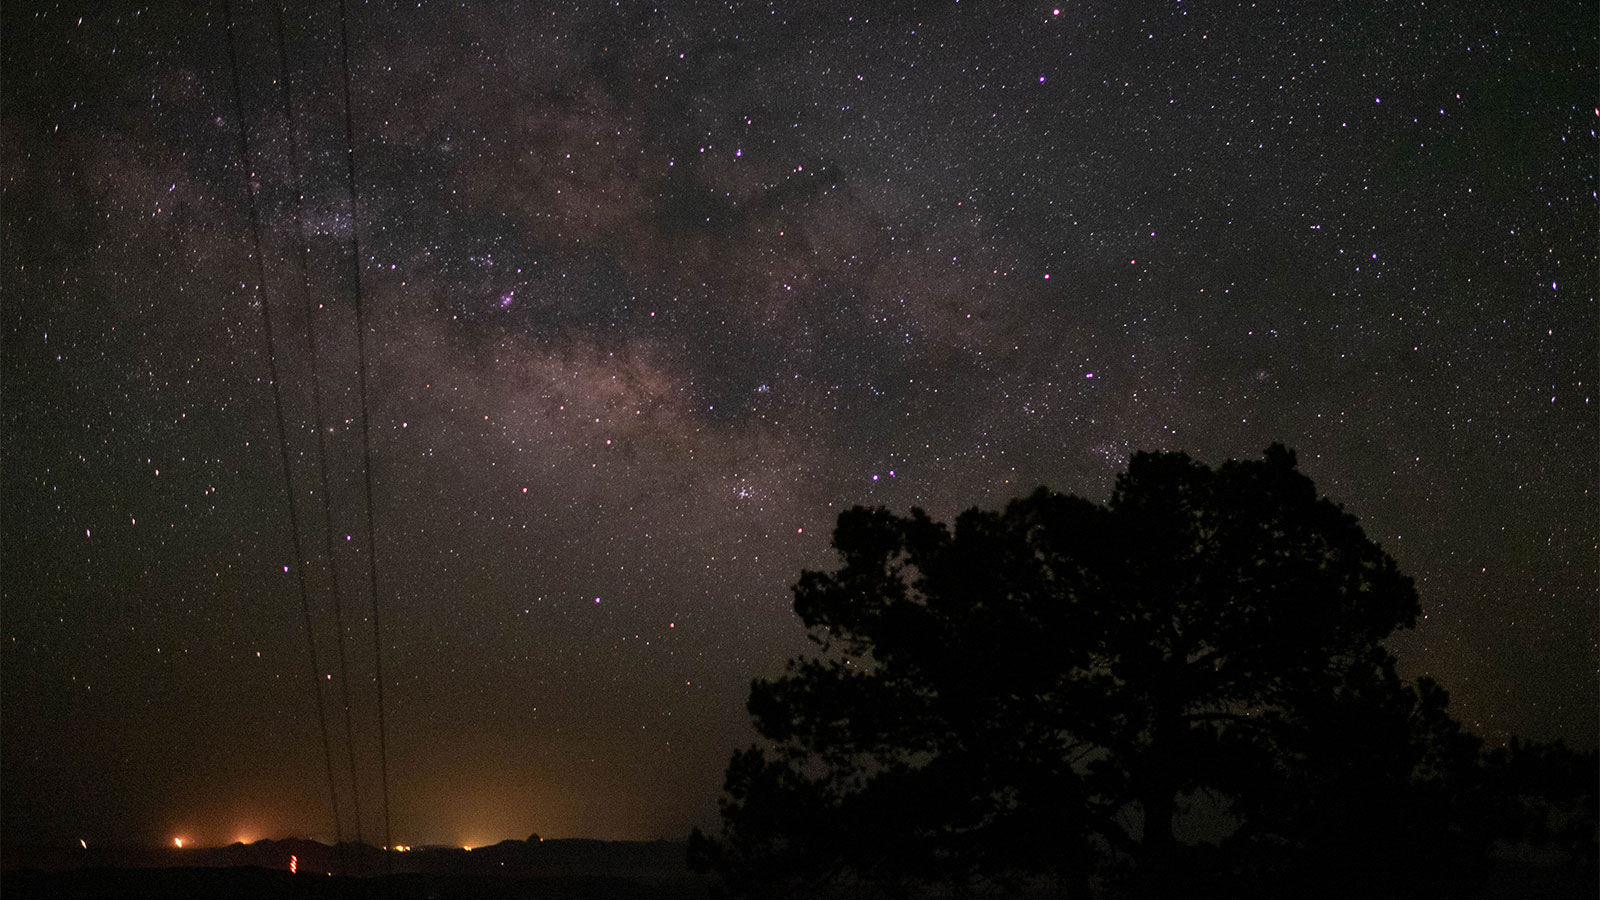 A picture of a tree set against the Milky Way with points of artificial light on the horizon.